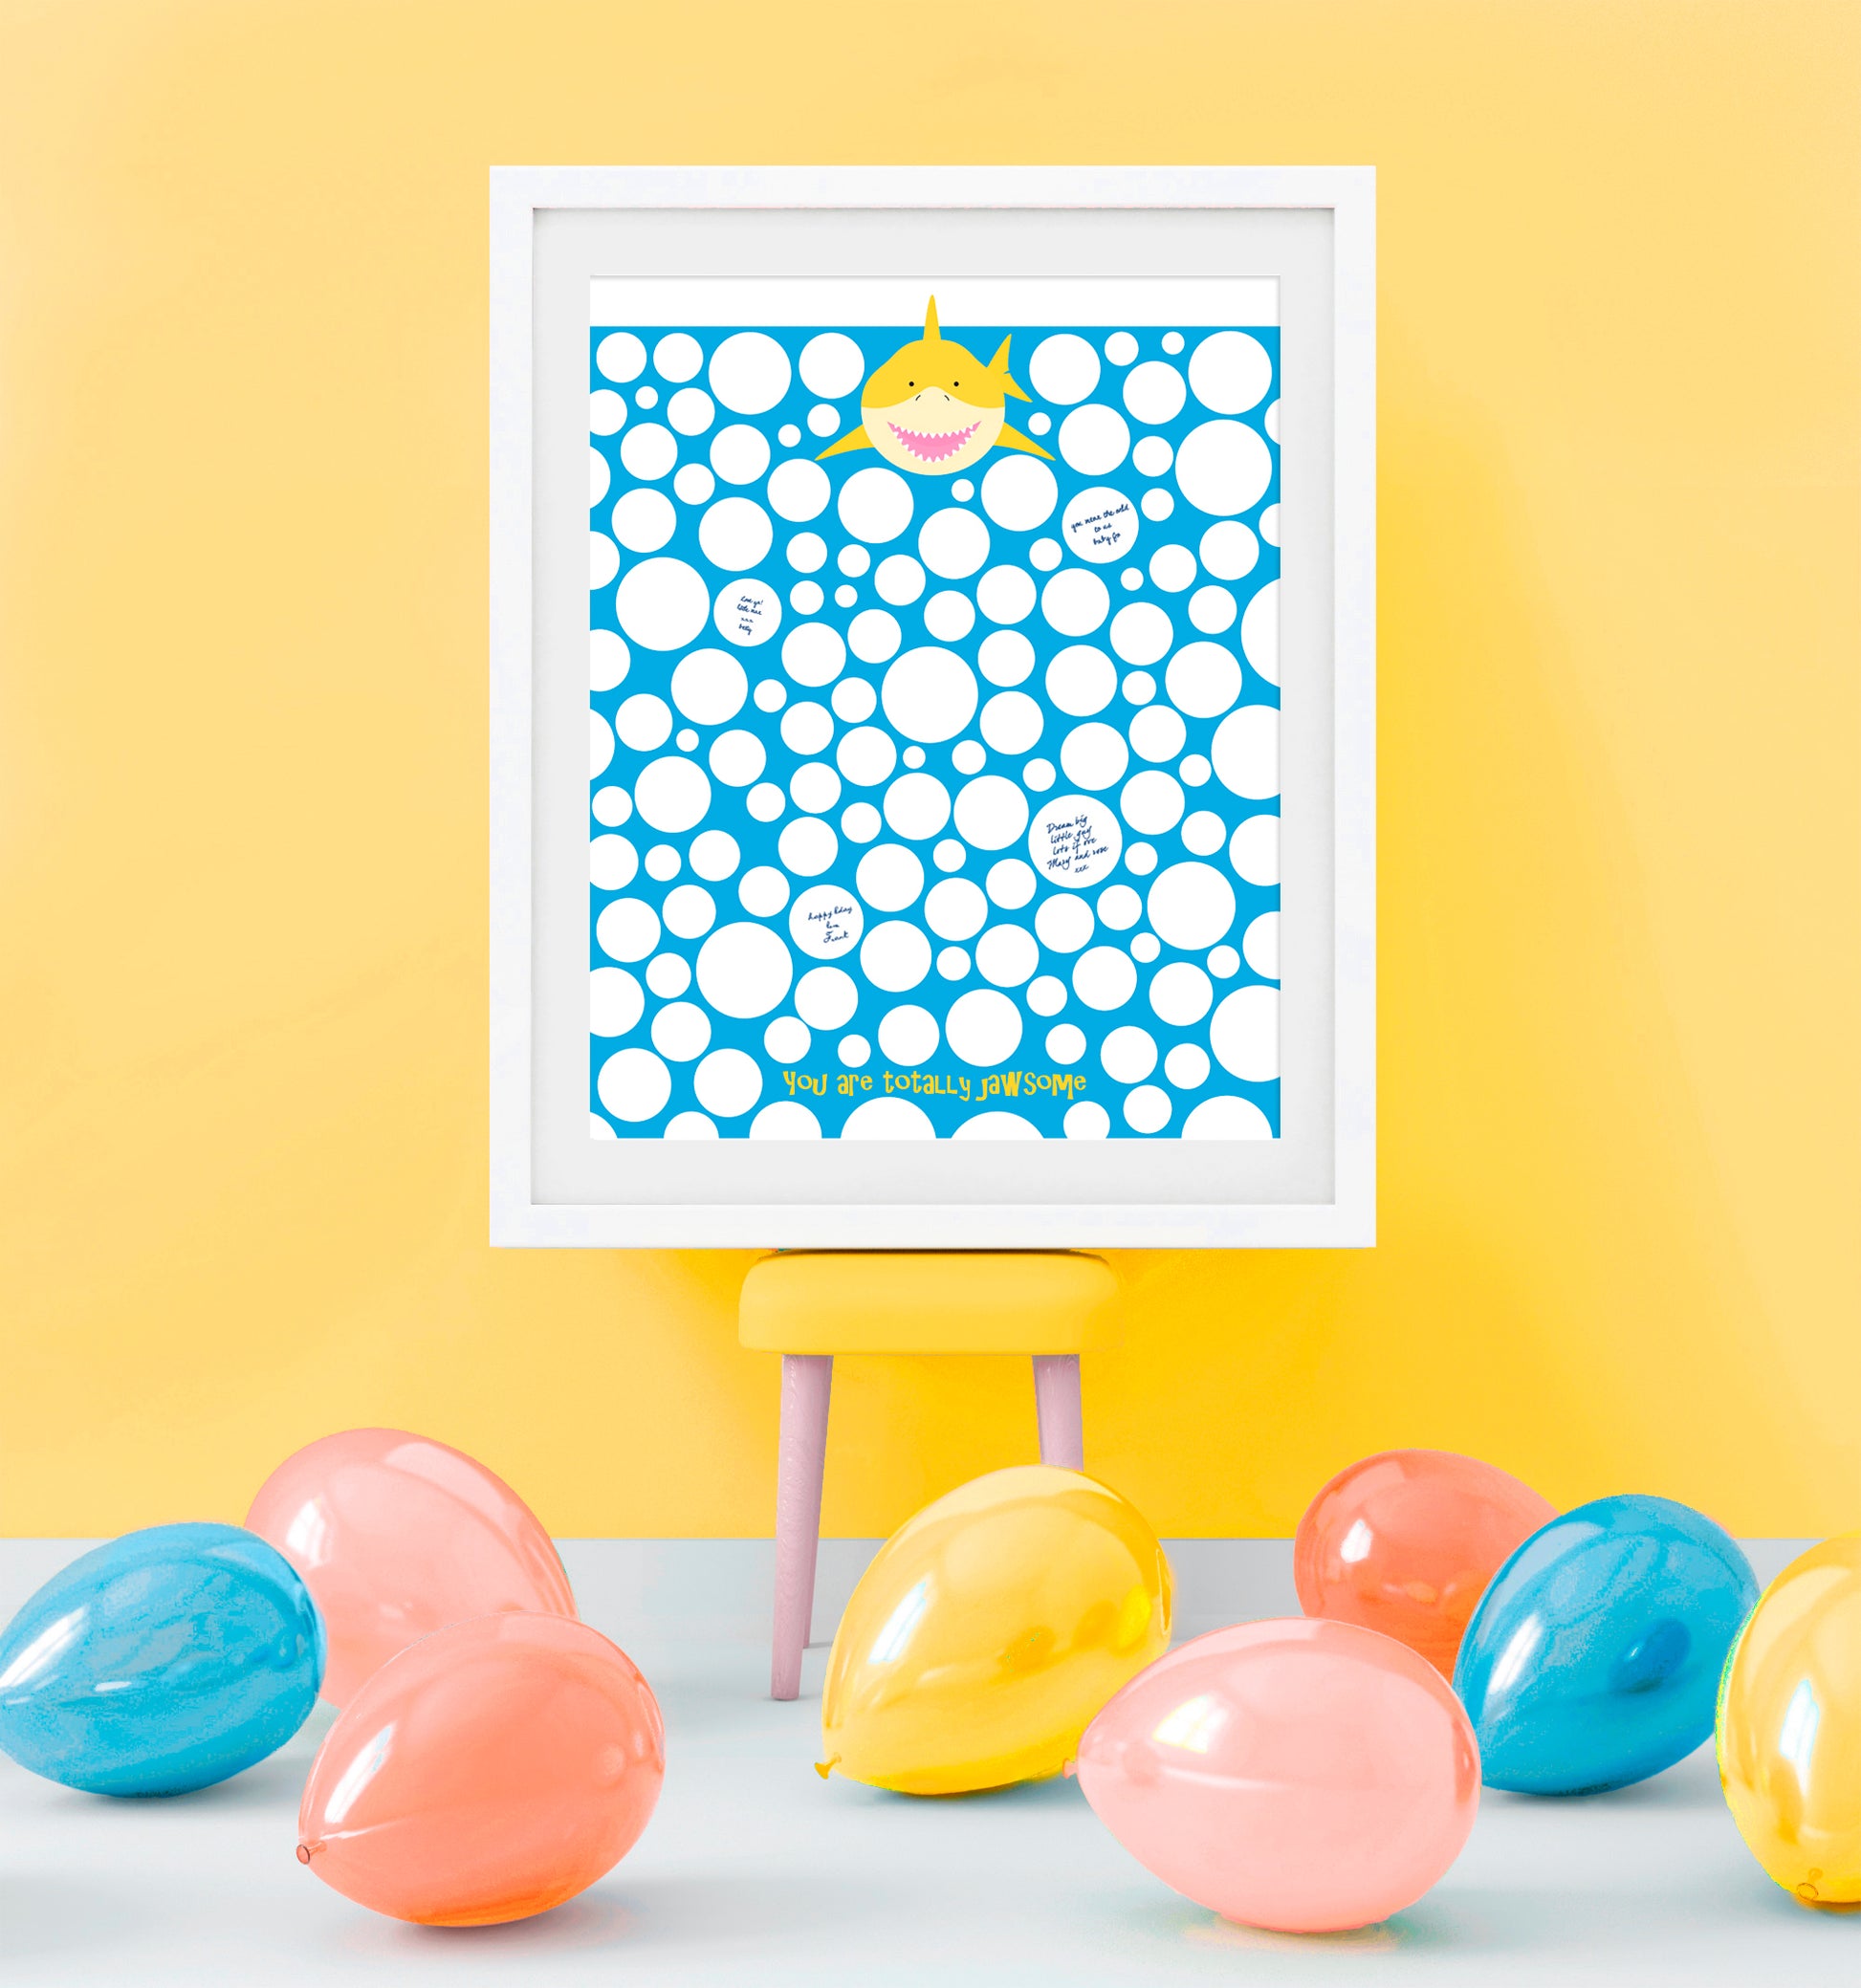 guestbook poster of a shark with bubbles at a party with balloons in yellow room